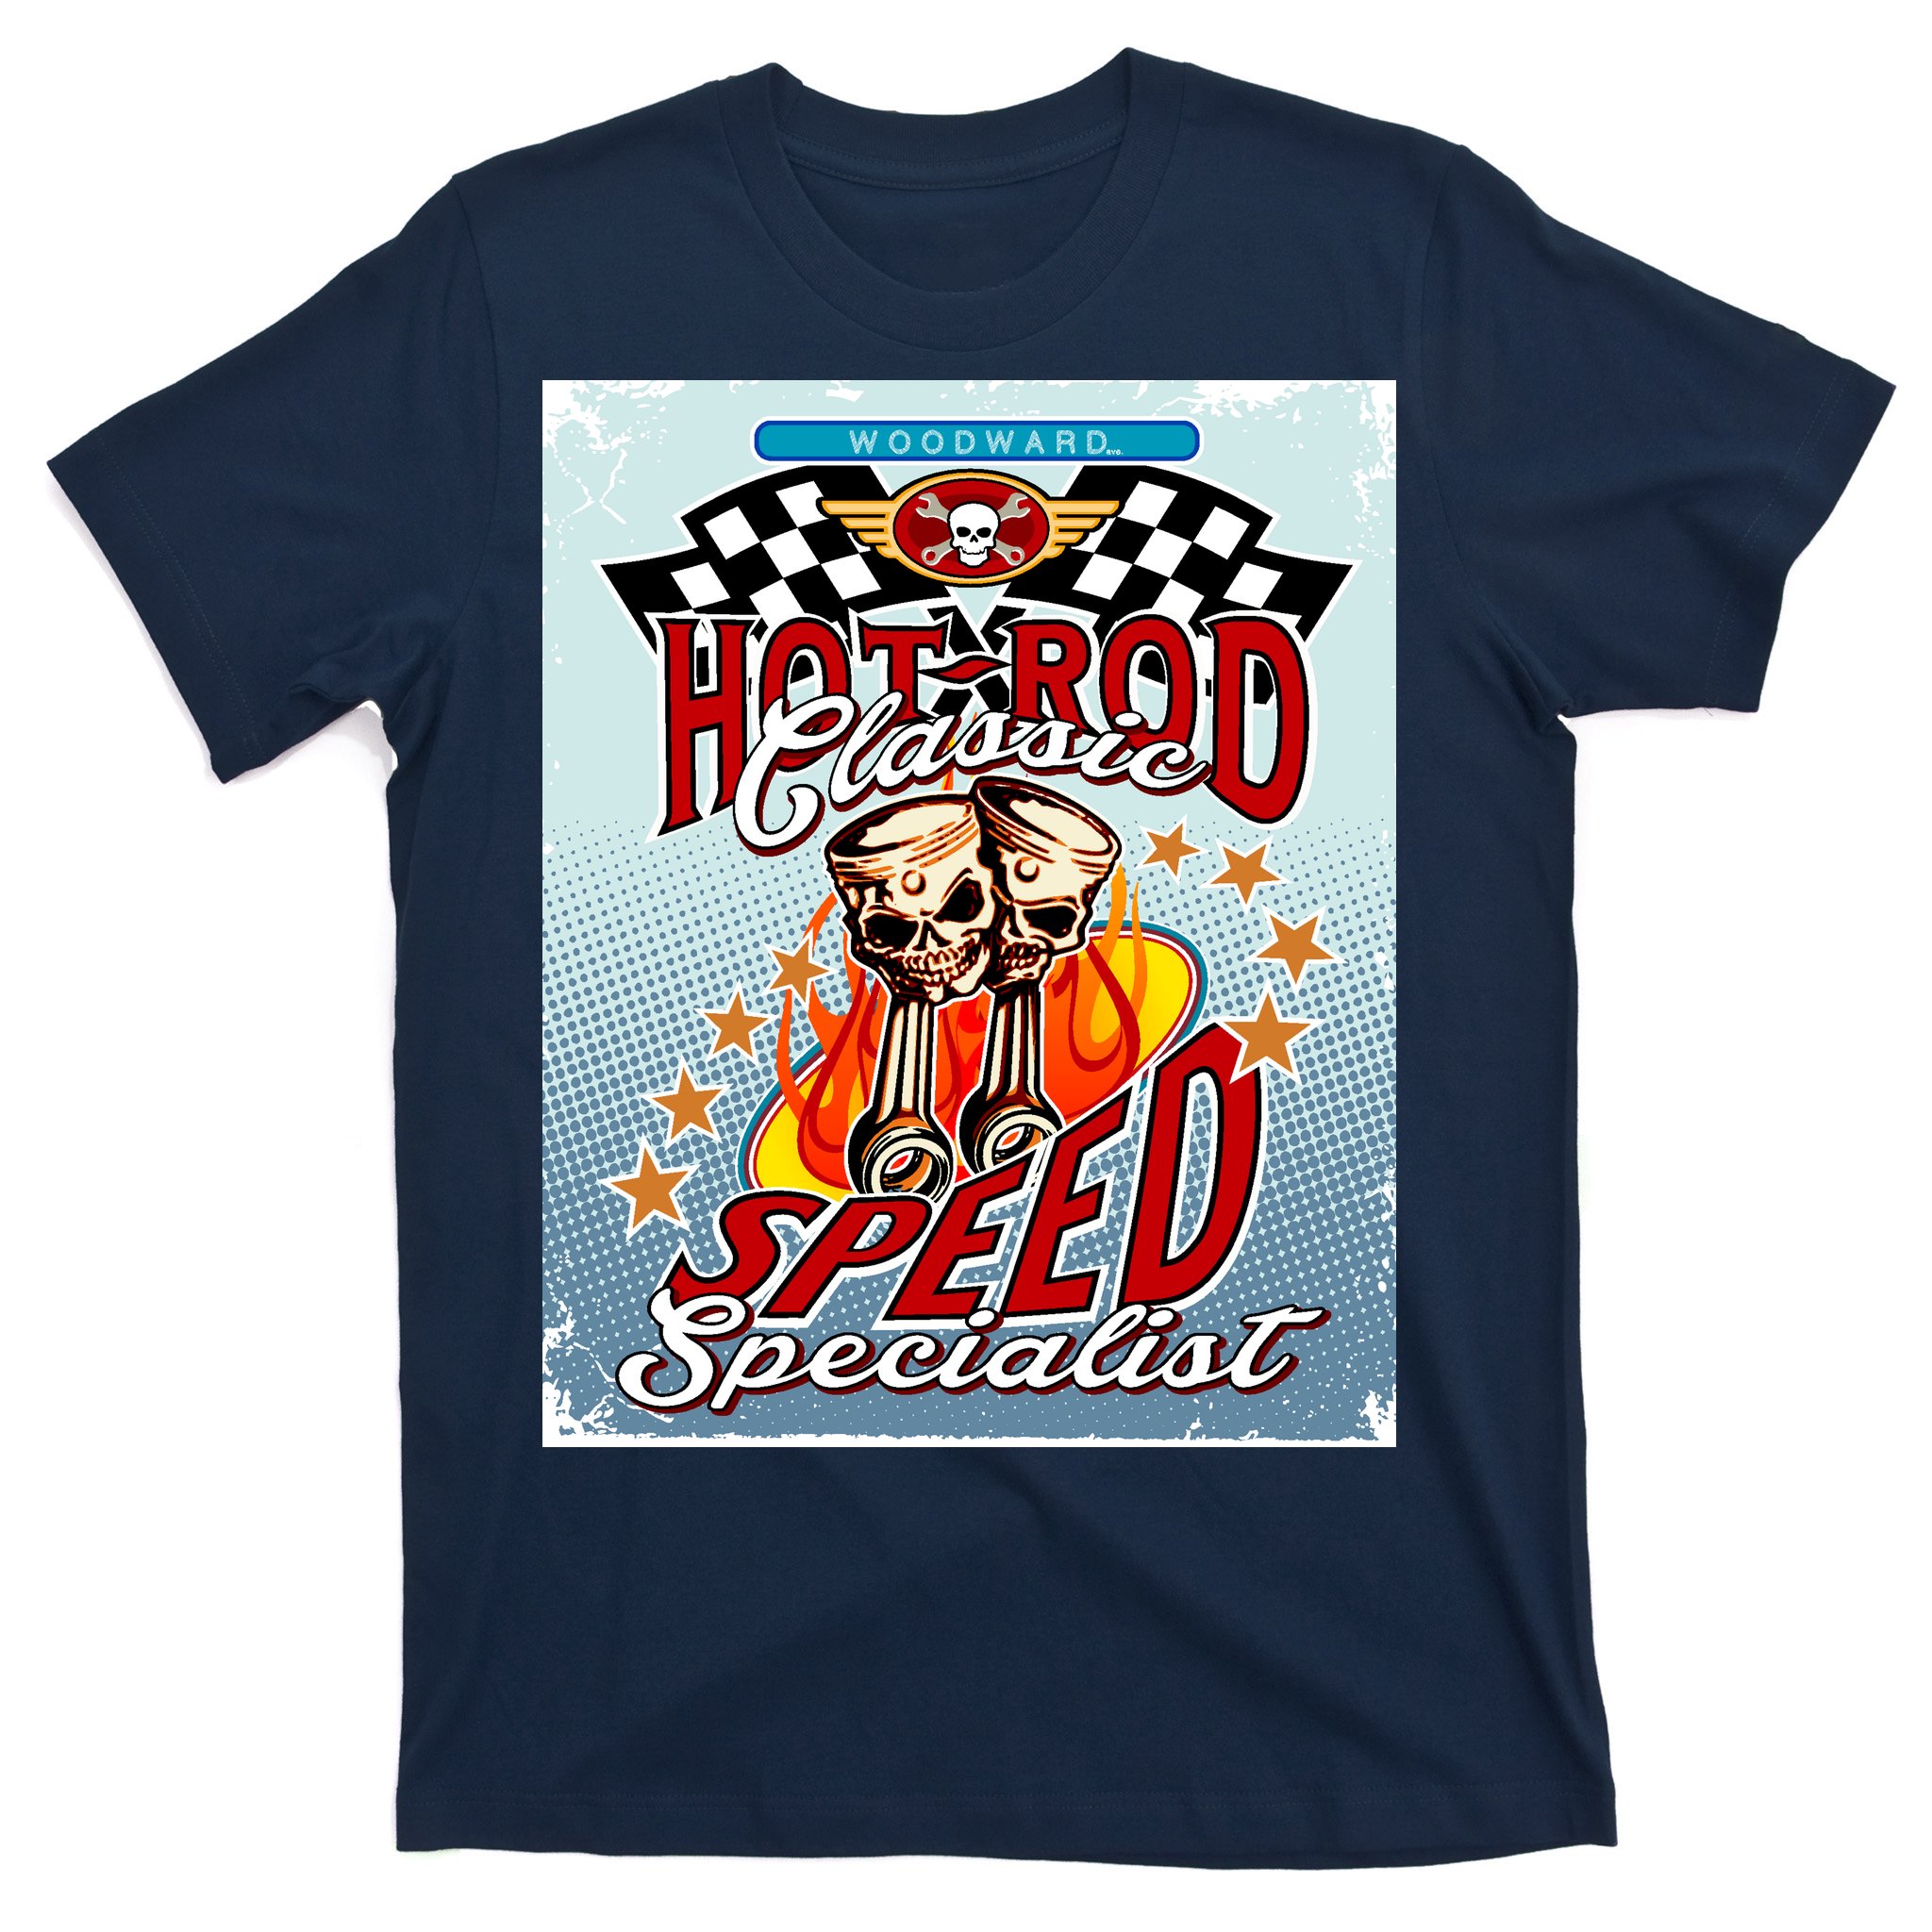 Old school hot rod Hotrod t shirt One Life Live It Coupe shirt speed shop t shirt car guy shirt Hot rod apparel Hot rod shop t shirt